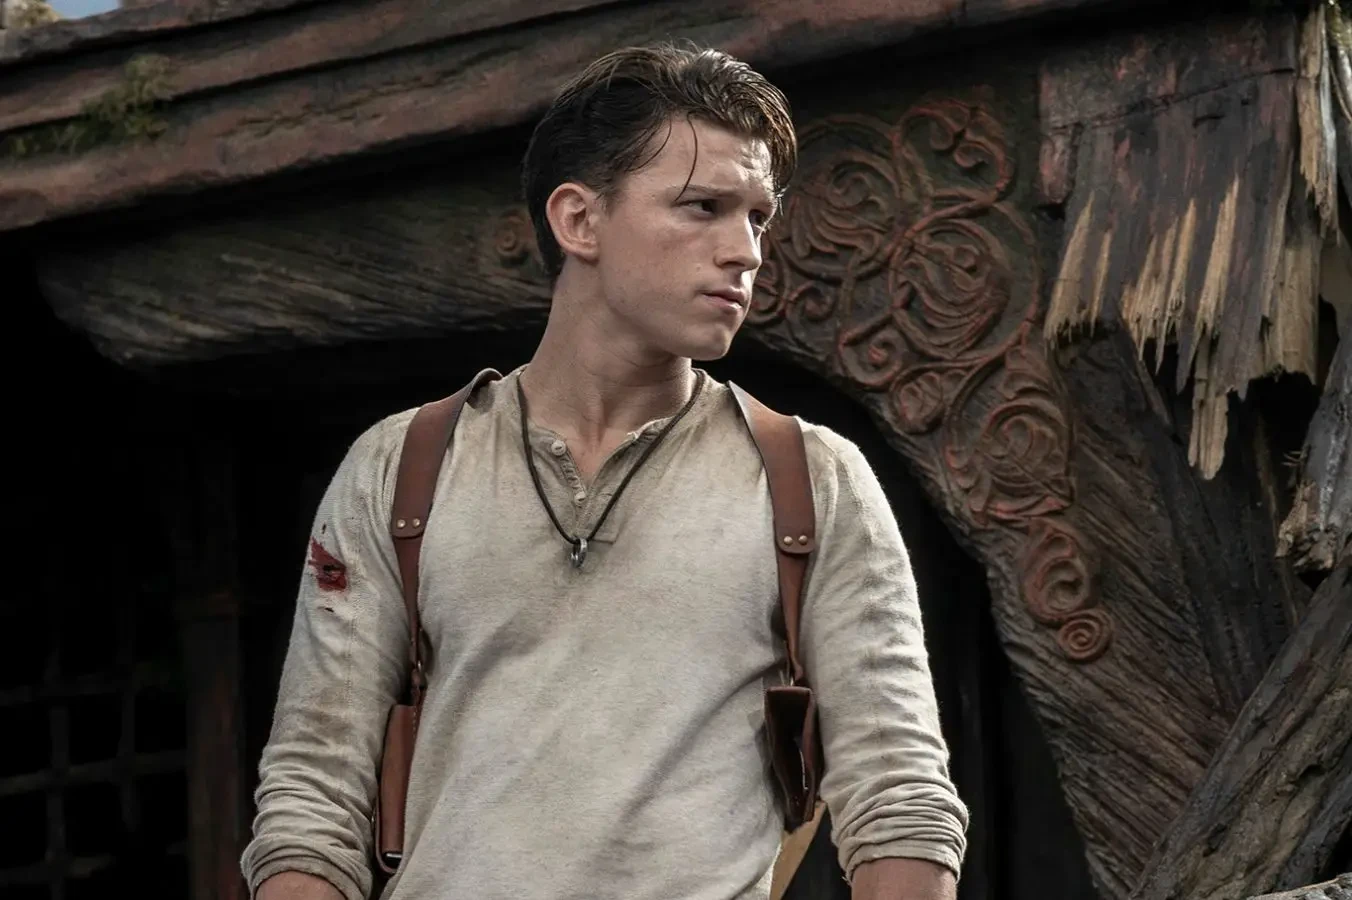 Tom Holland says Uncharted character was his hardest role